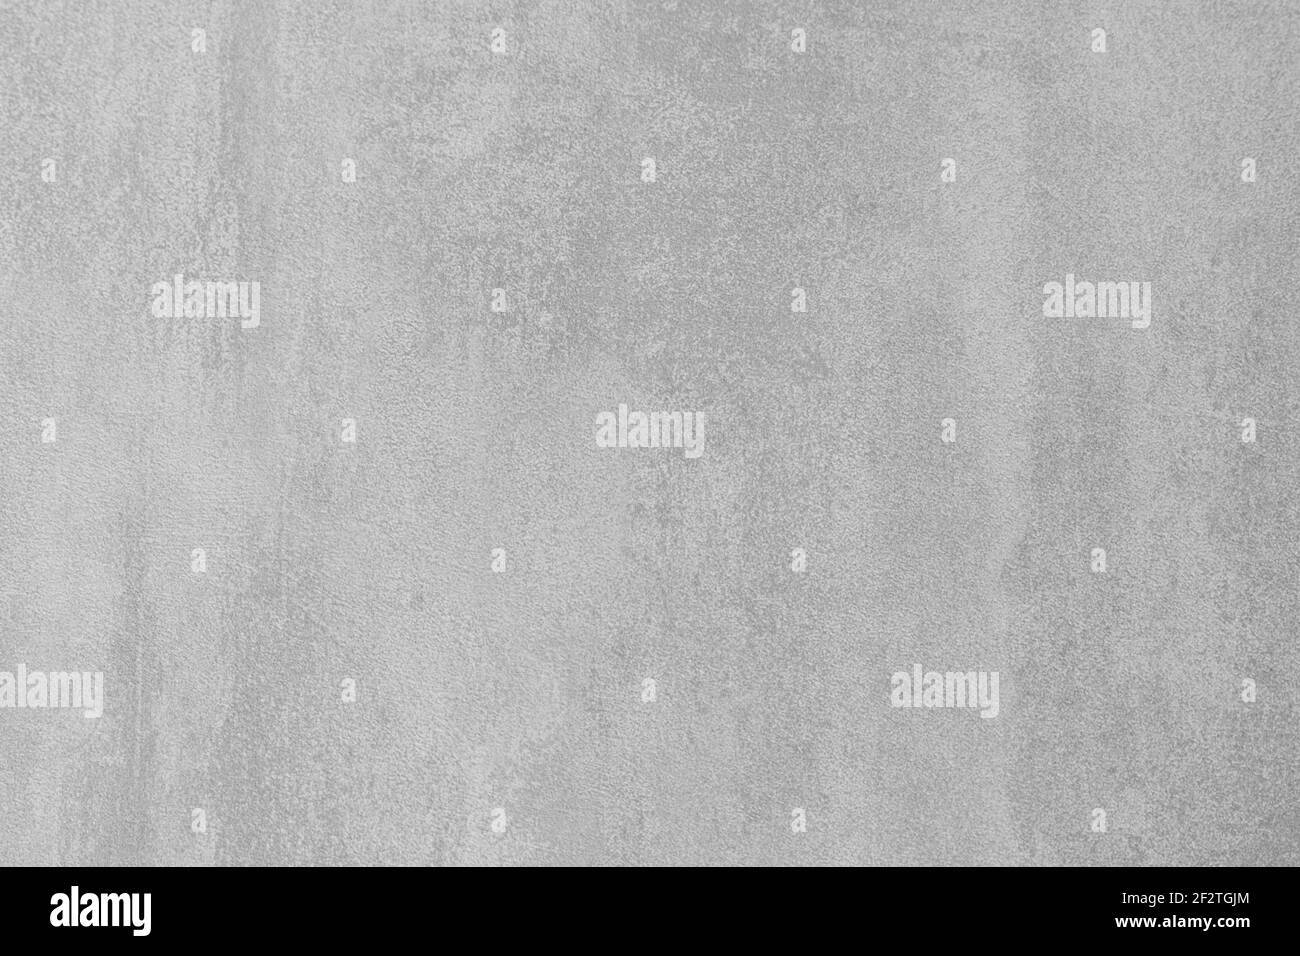 High resolution of cement block texture. Cement and concrete texture for pattern and background. Stock Photo